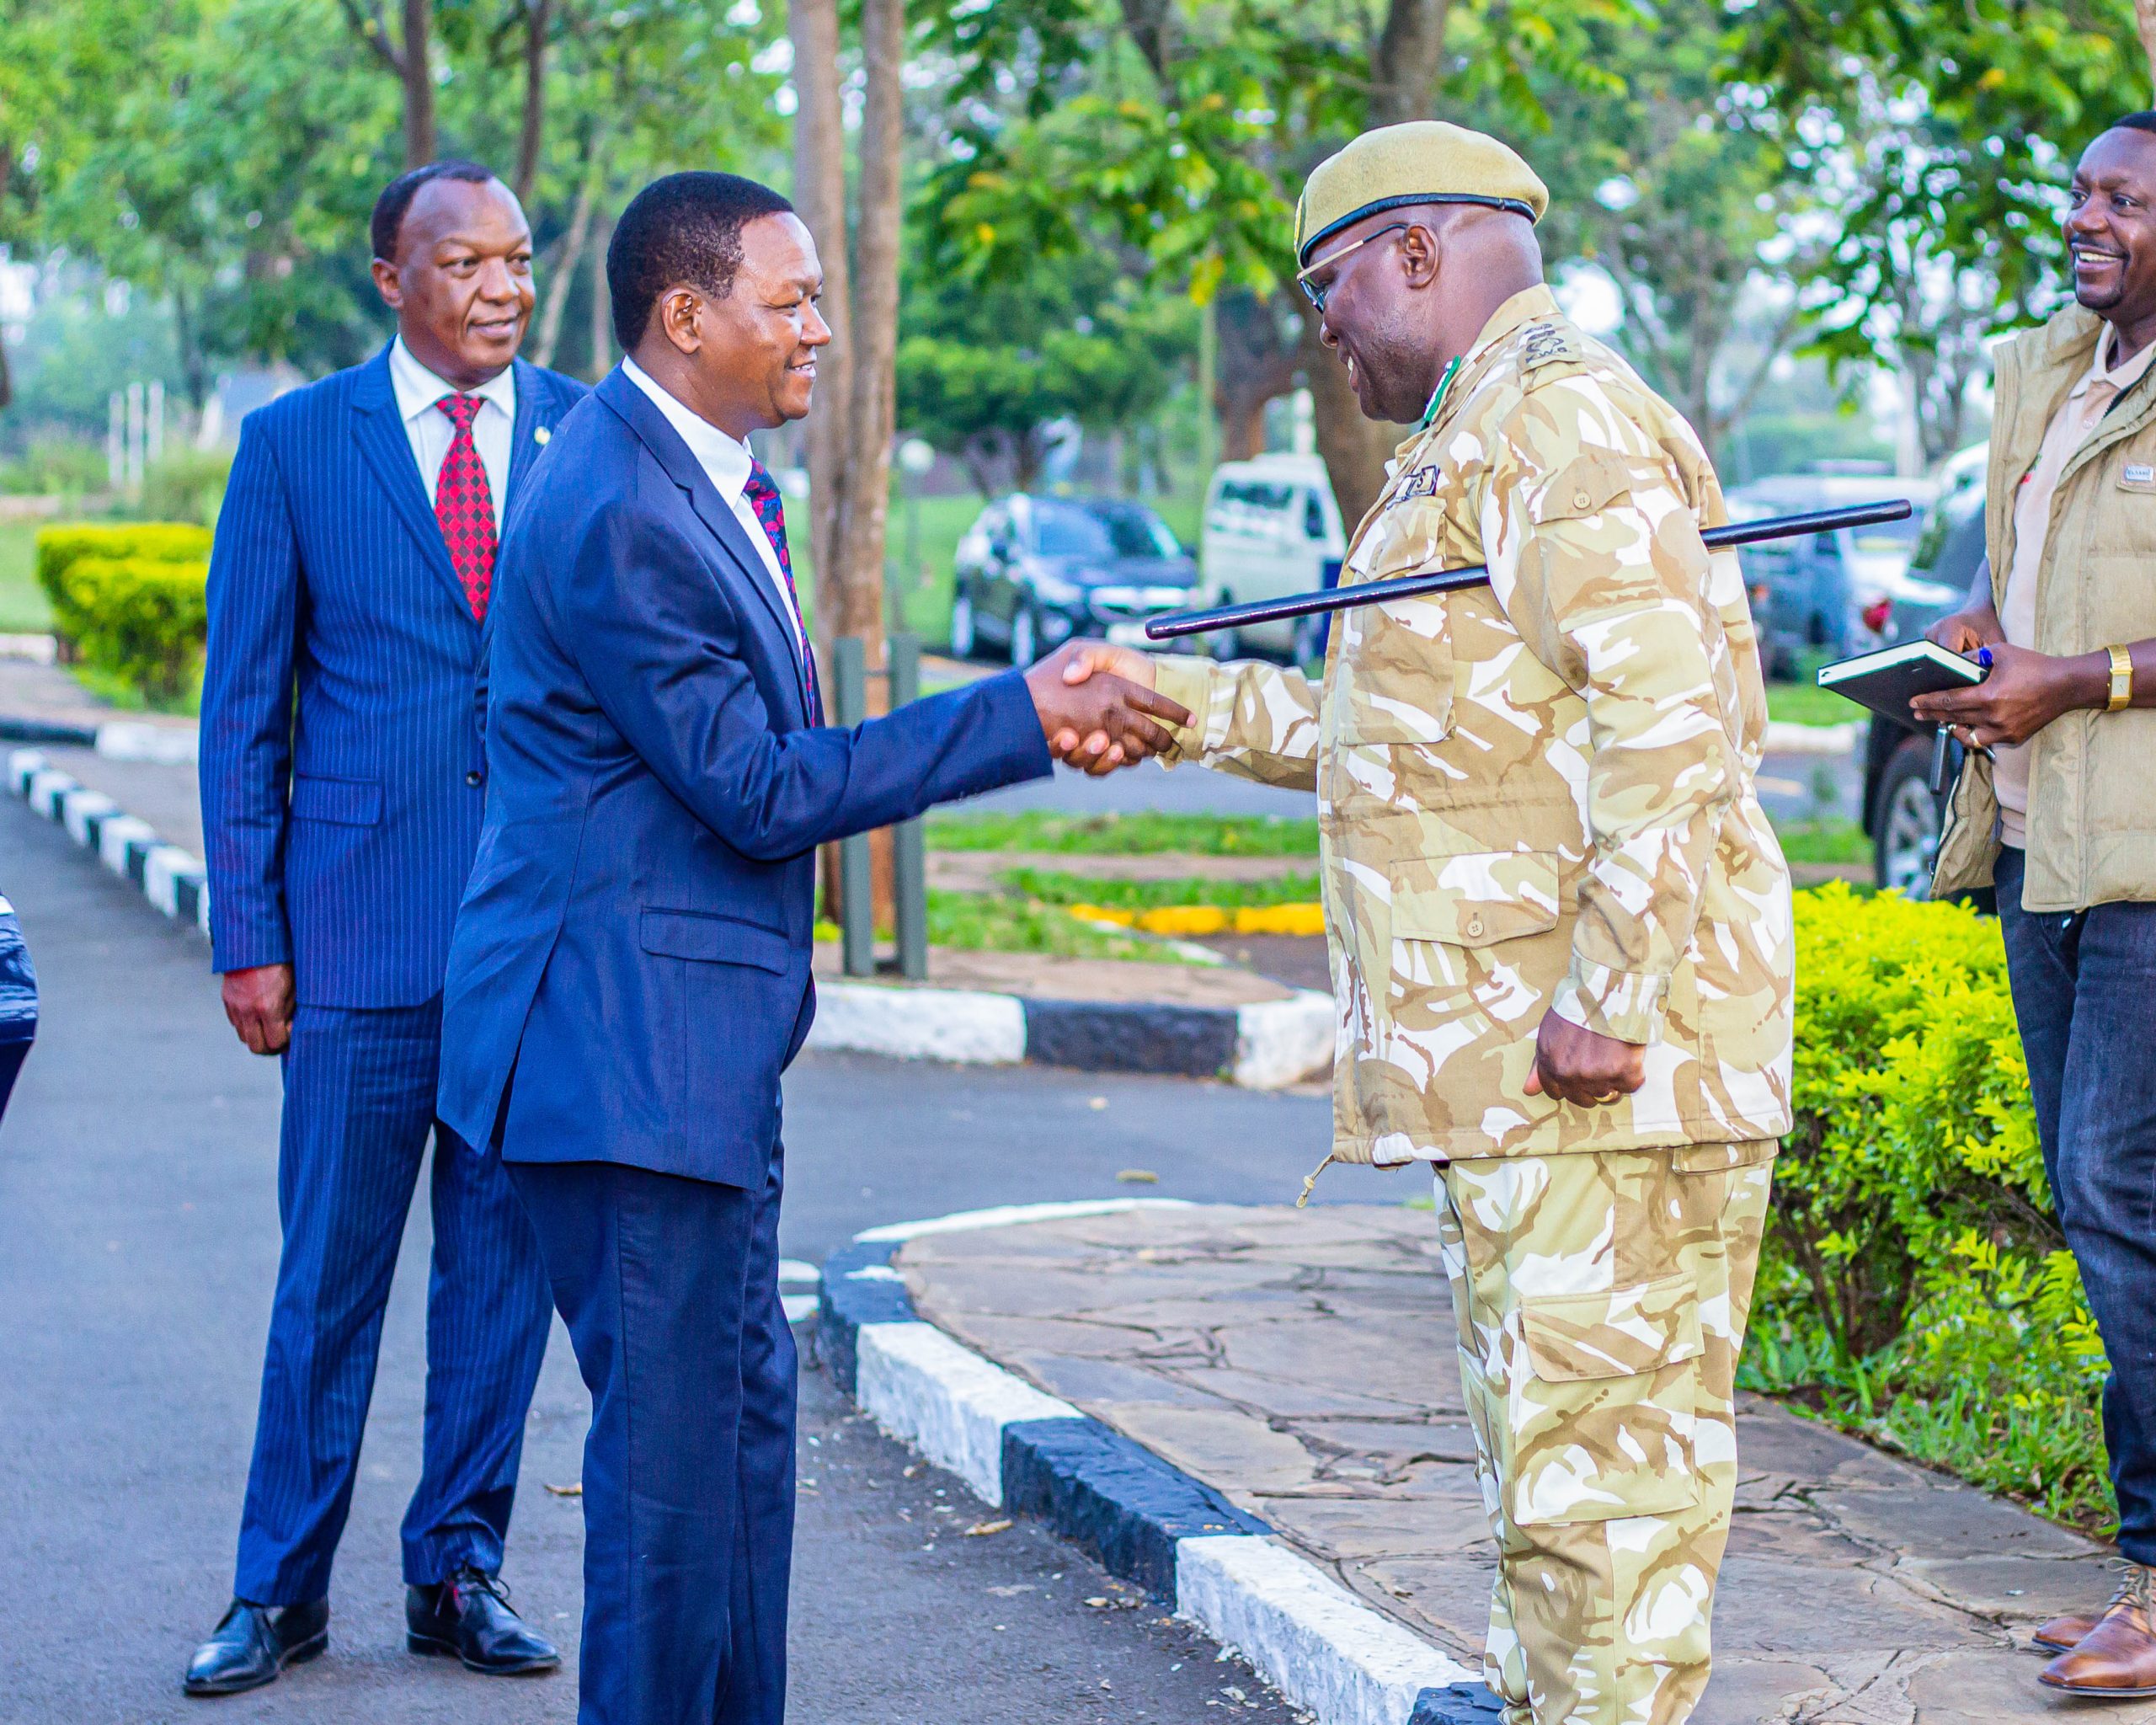 The Cabinet Secretary for Tourism and Wildlife, Dr. Alfred Mutua (in suit) being greeted by the Director General Kenya Wildlife Service, Dr. Erustus Kanga.